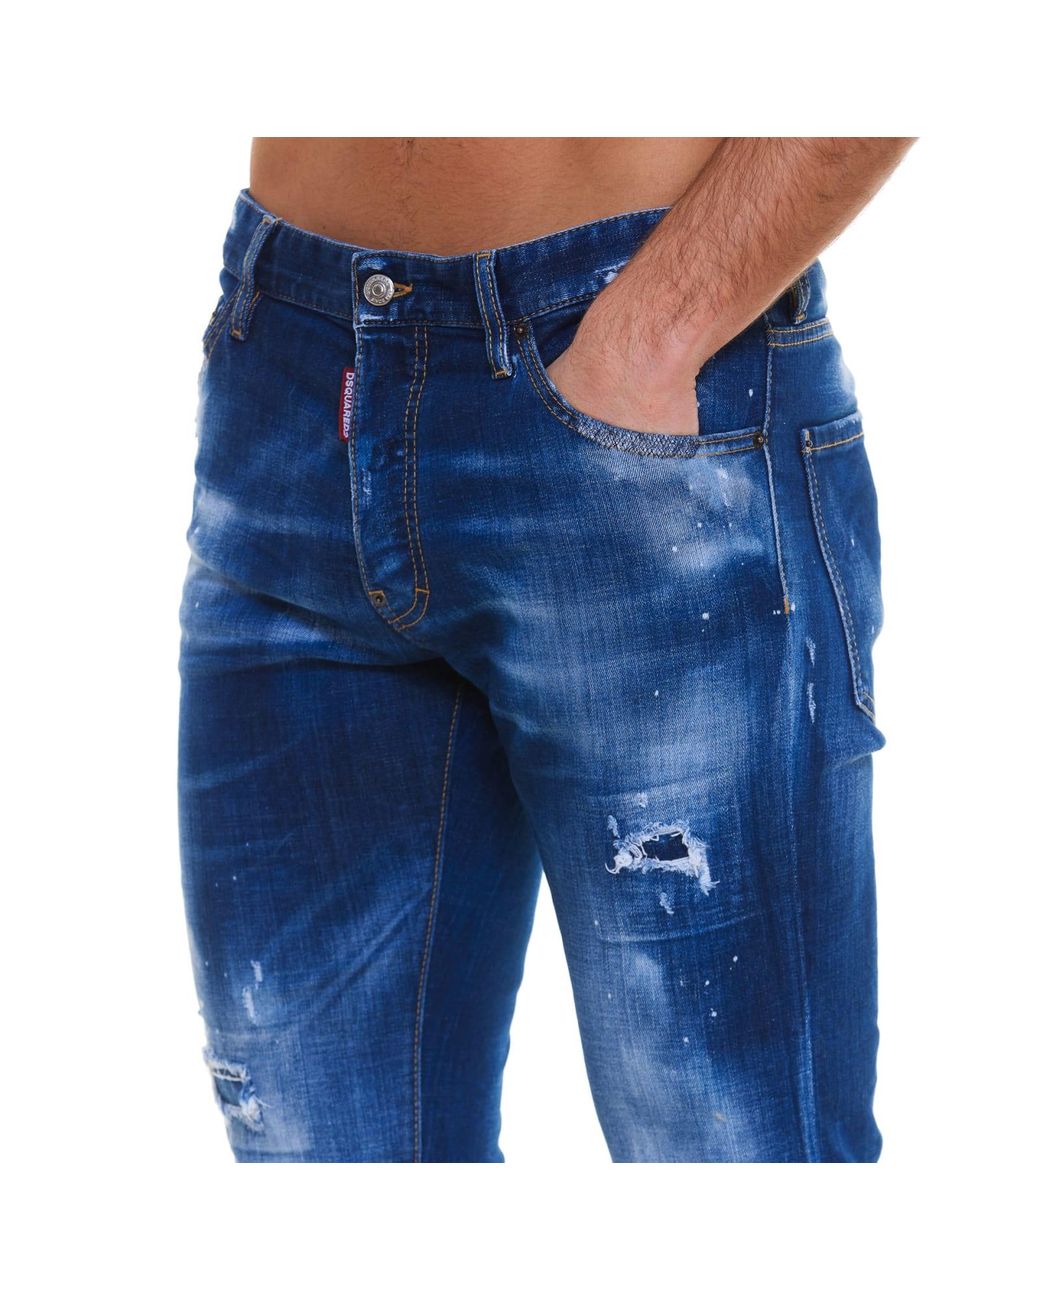 DSquared² Icon Spray Cool Guy Denim Jeans in Blue for Men - Save 